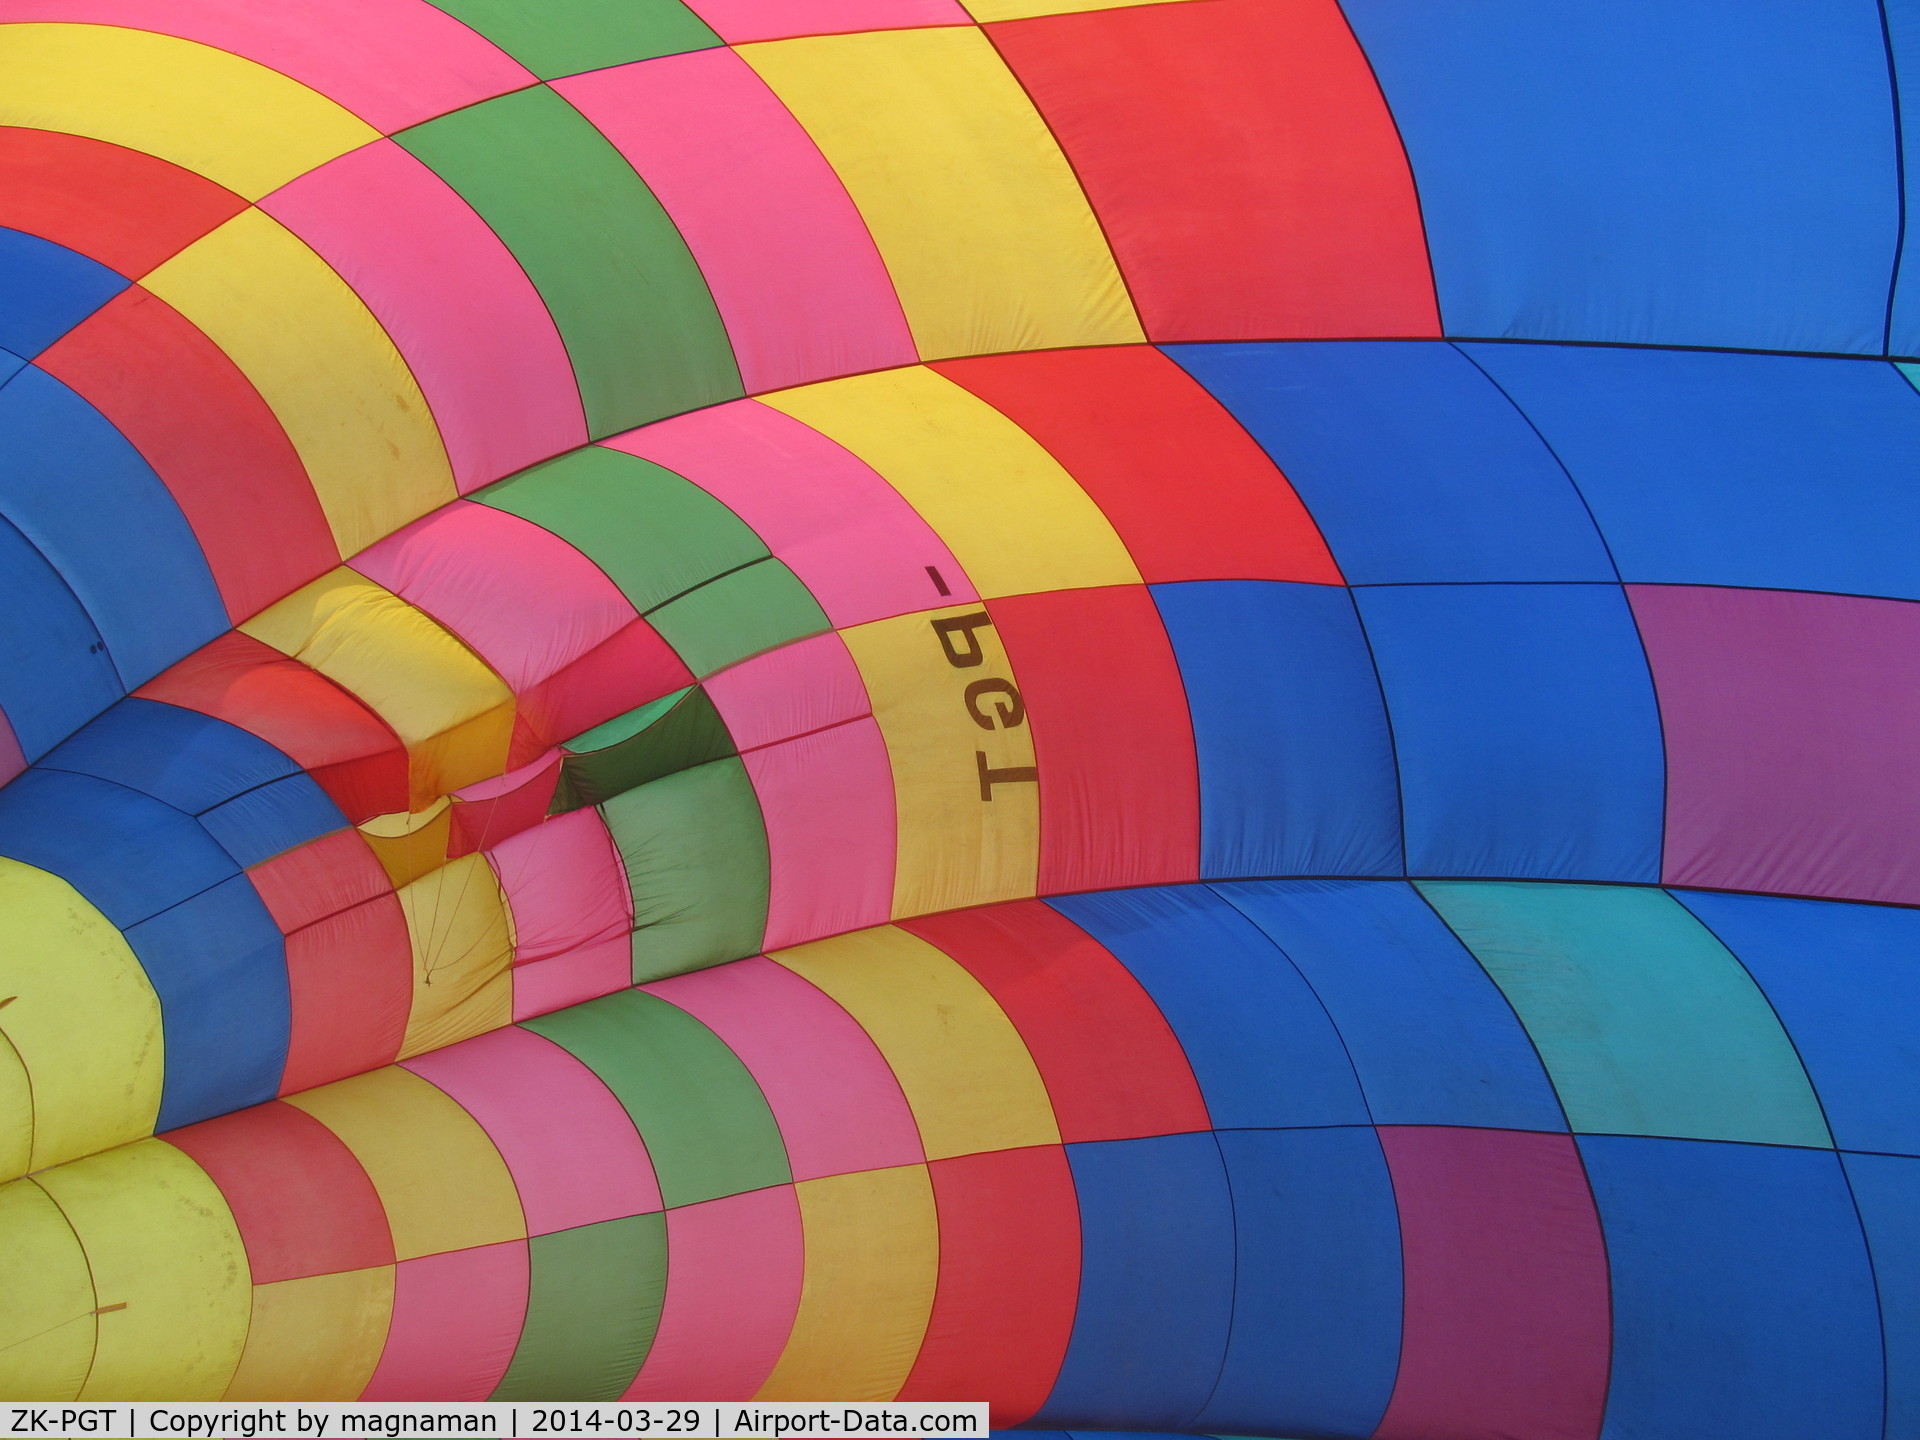 ZK-PGT, Thunder & Colt Ltd AX7-77 C/N 1002, Unusual view from INSIDE the balloon at University of Waikato